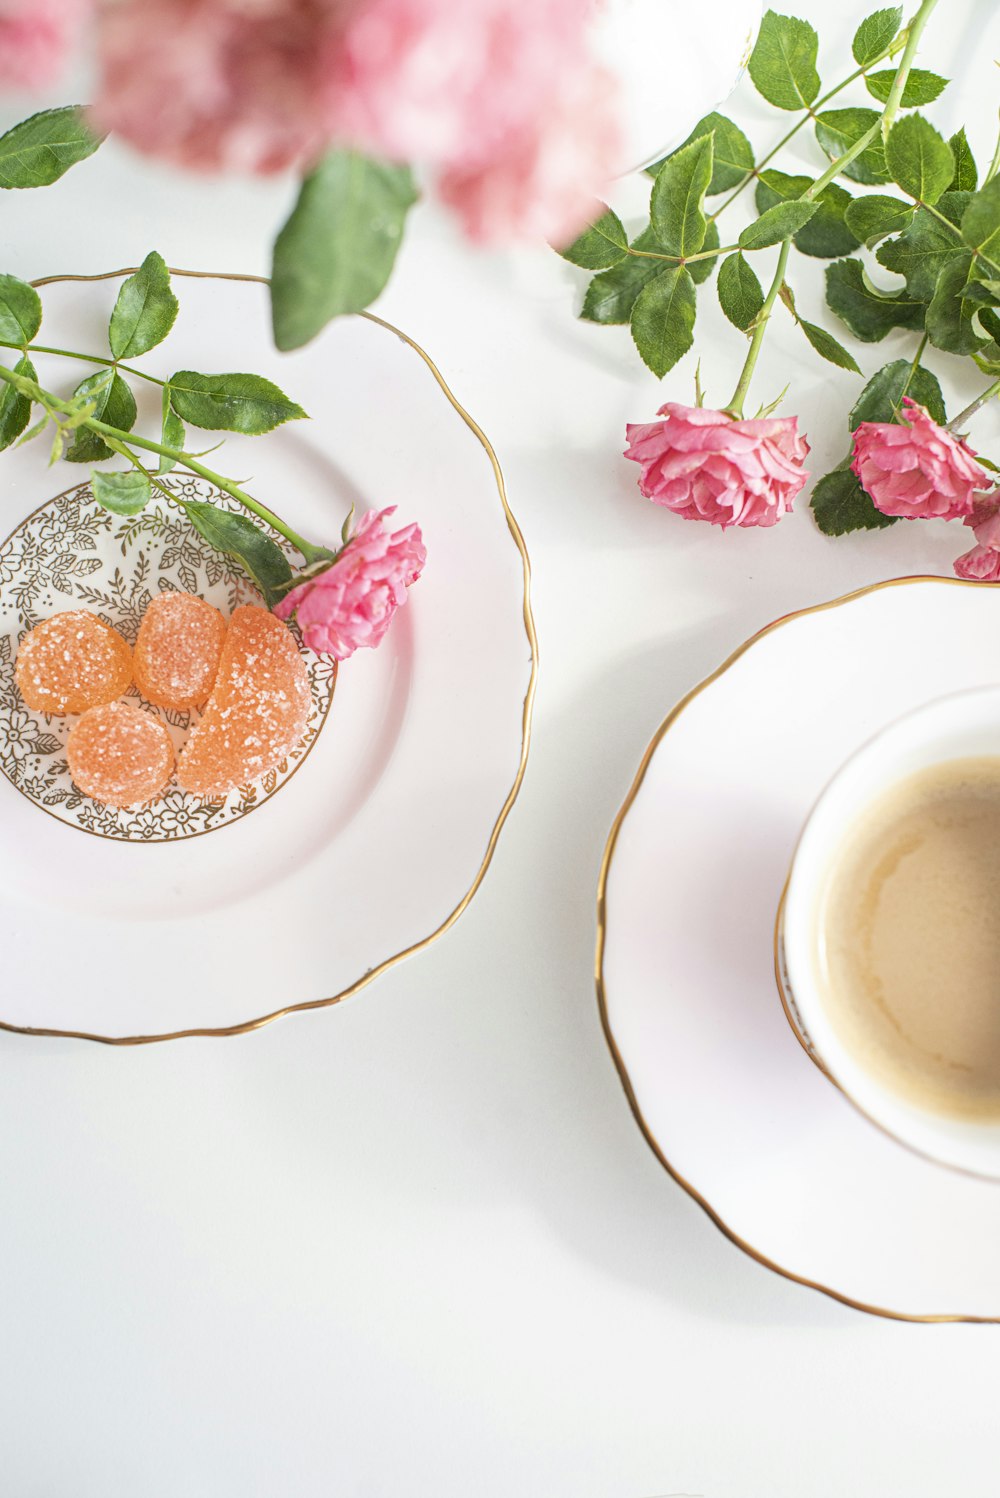 white ceramic cup with saucer beside pink flowers